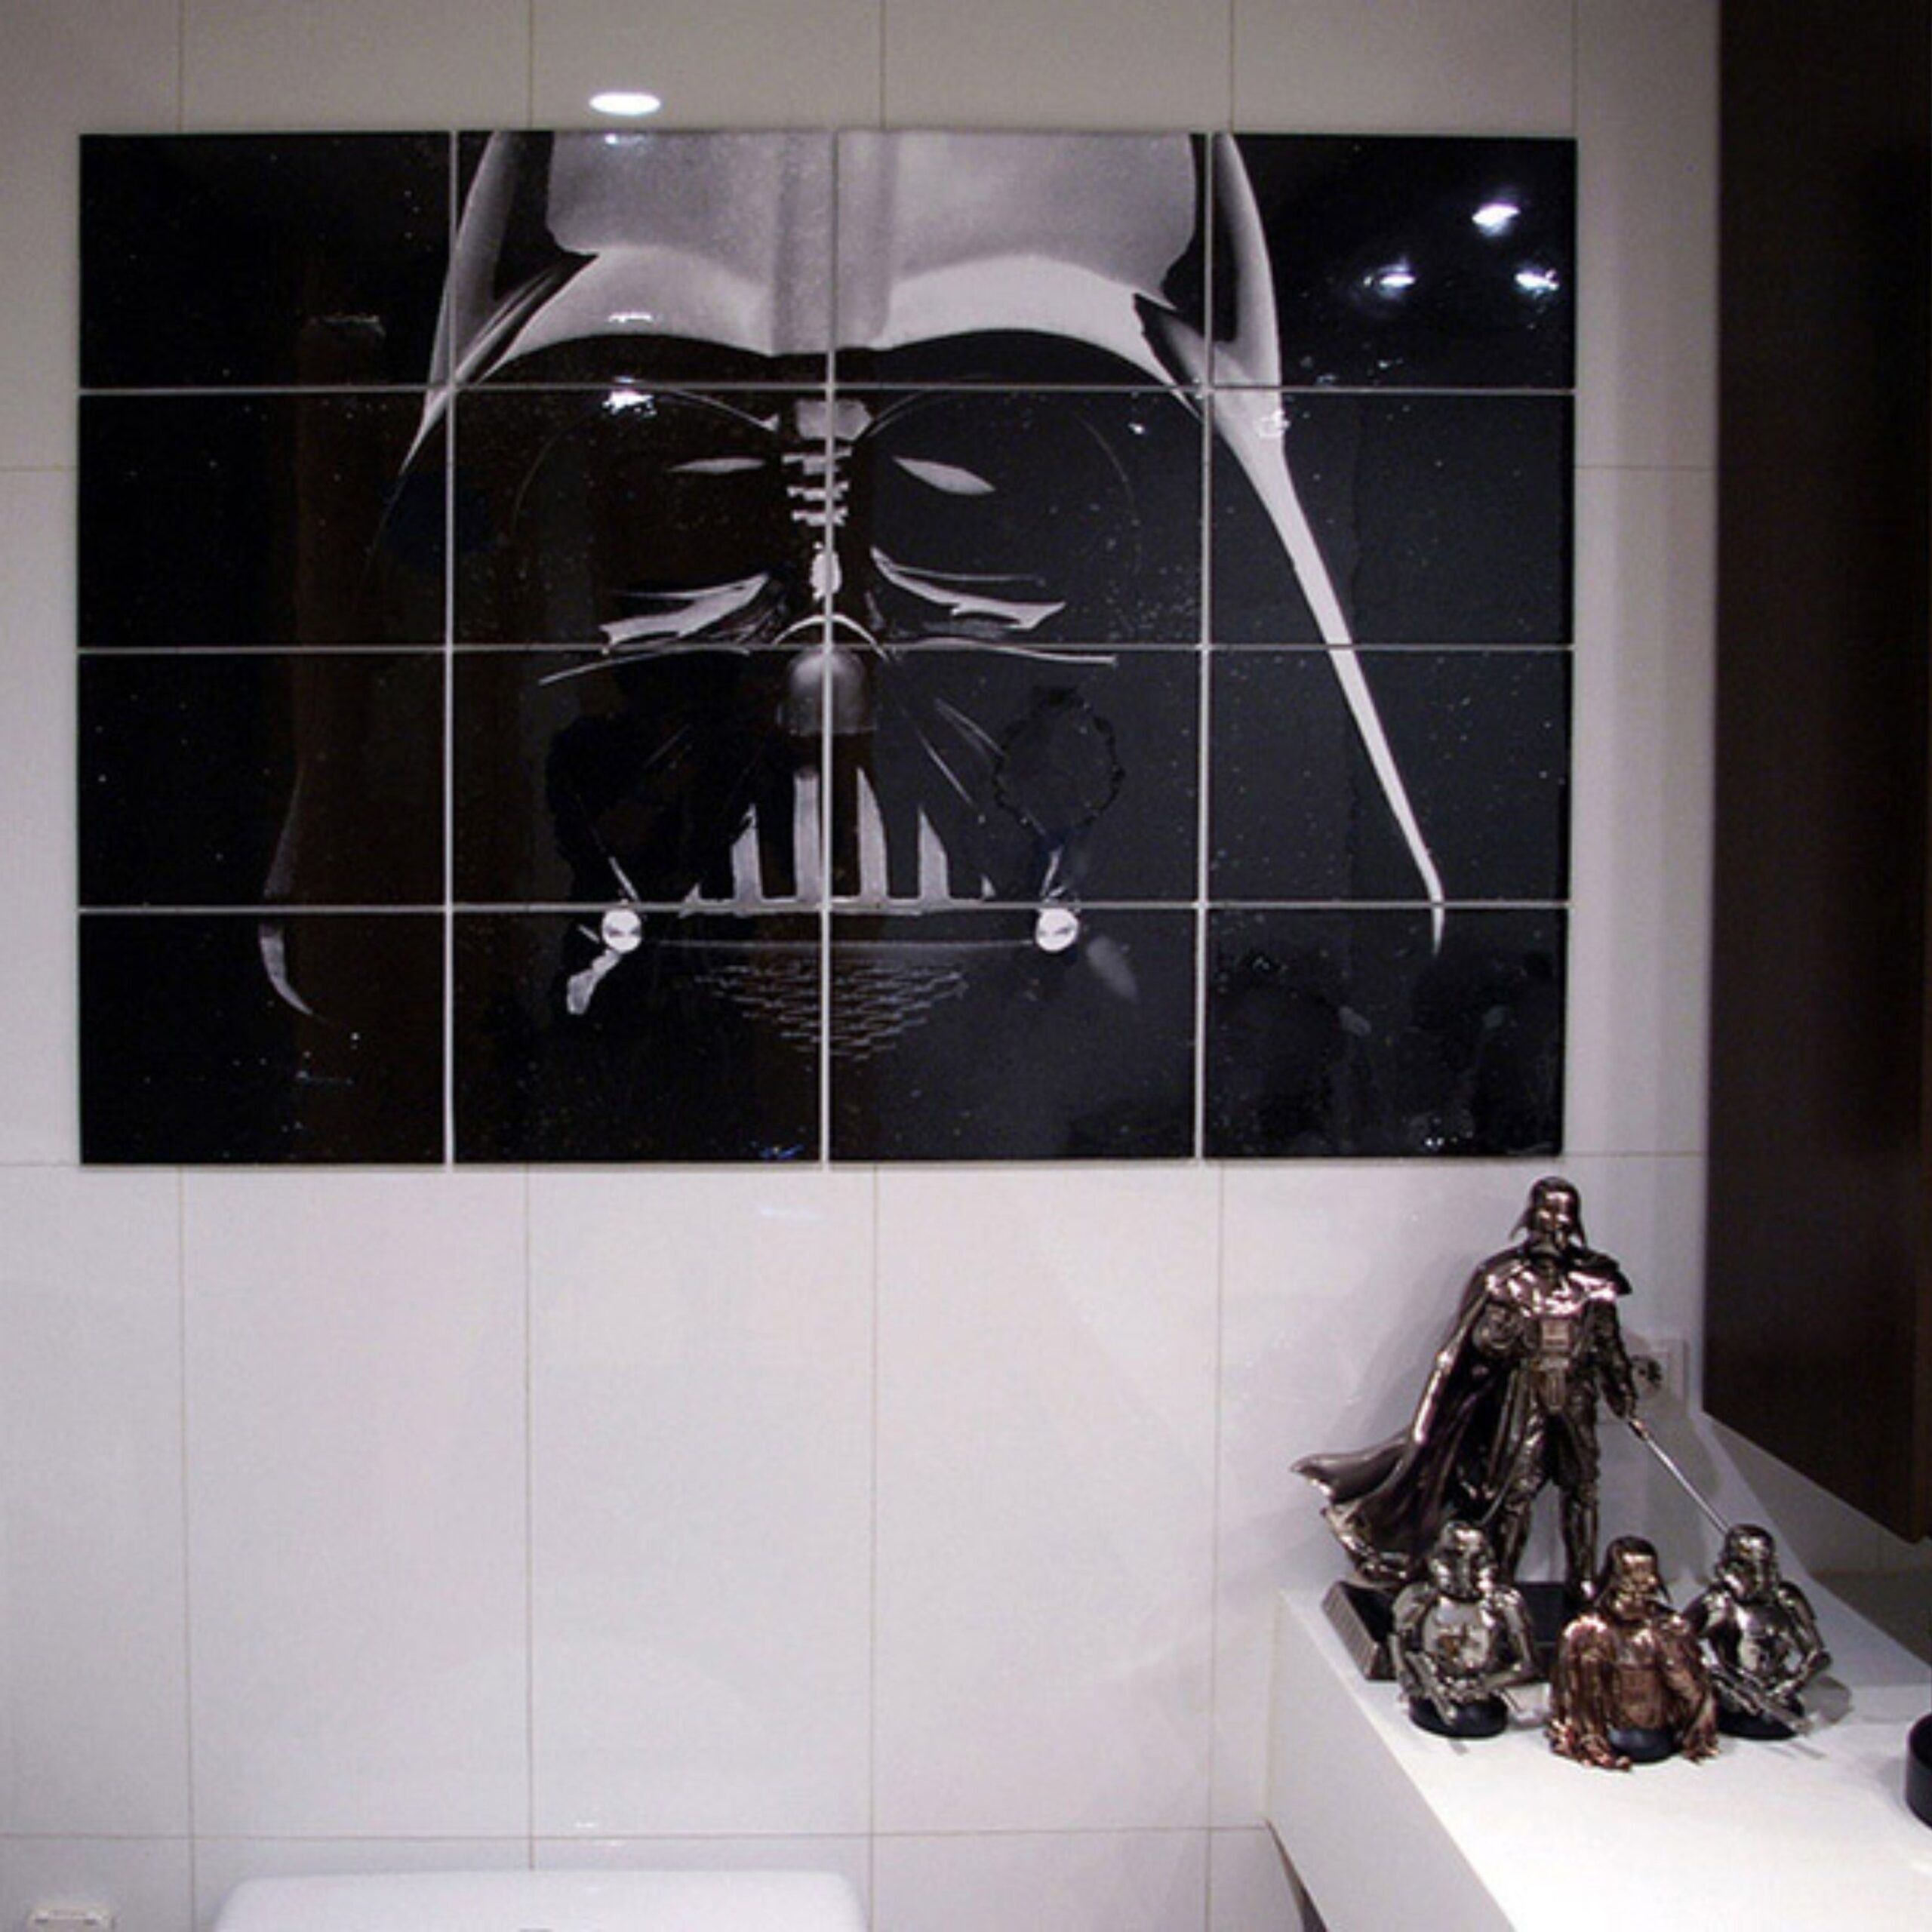 Awesome Star Wars Bathroom Accessories!